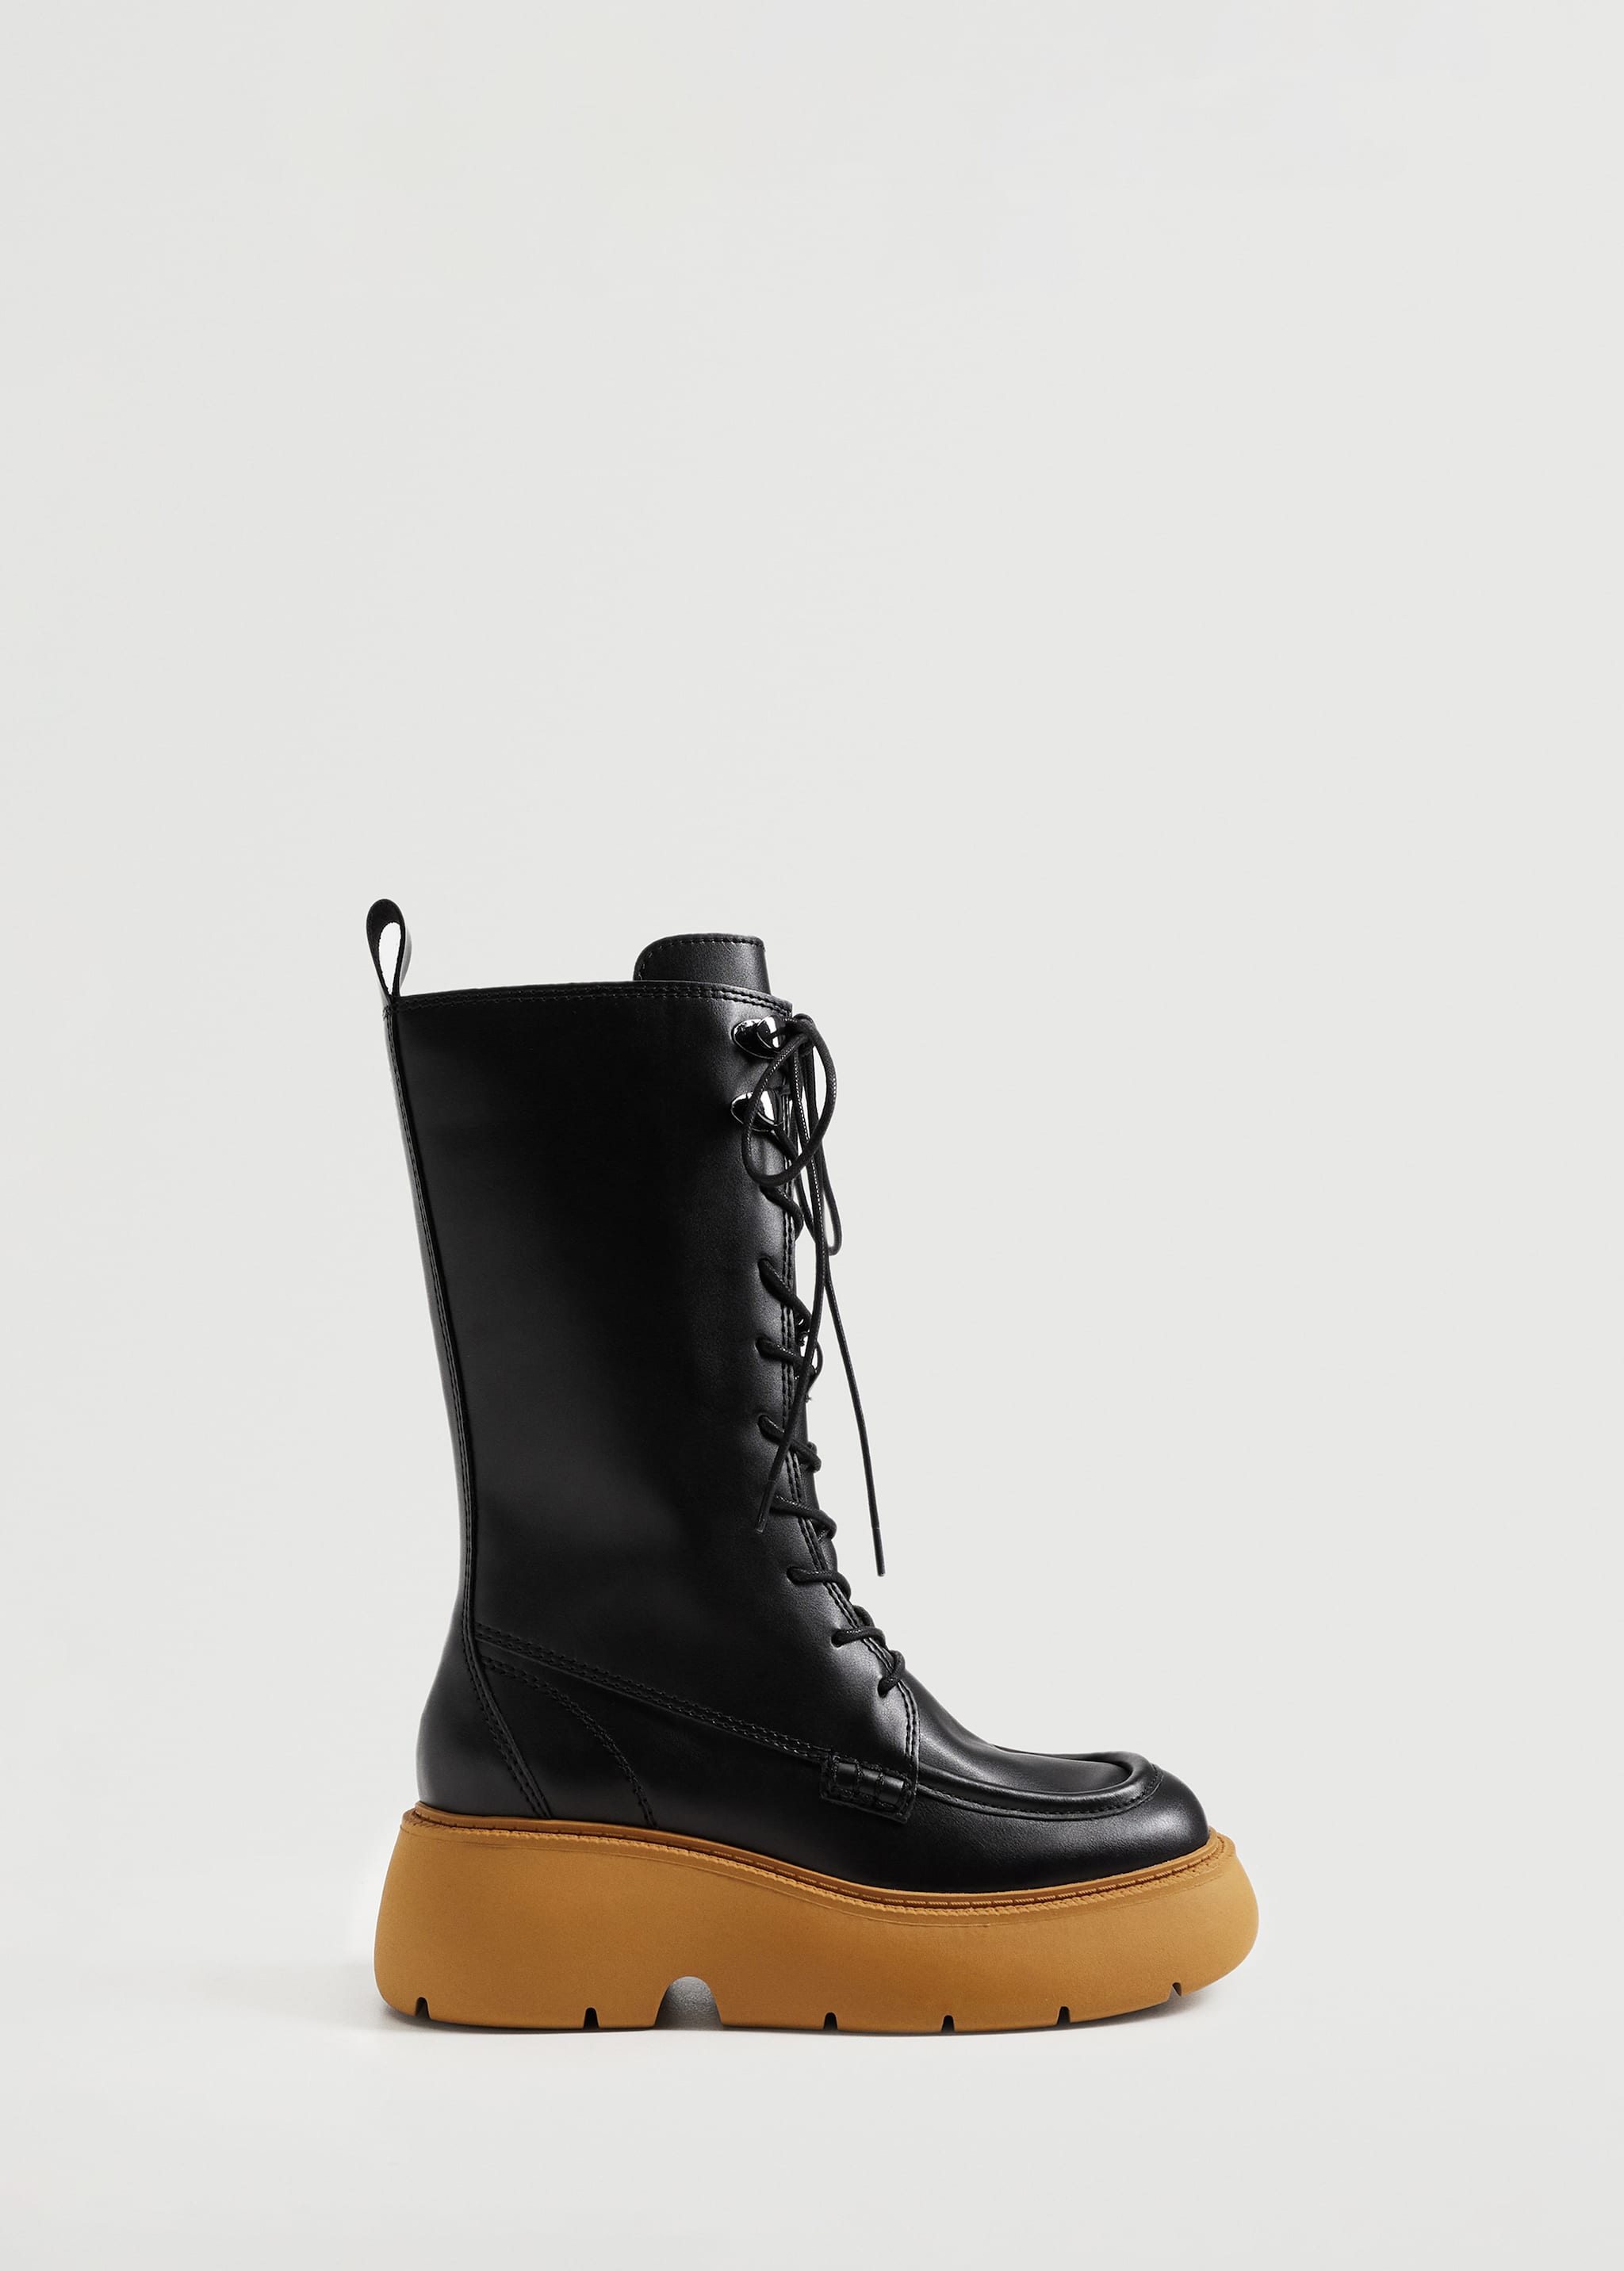 Platform boots with tall leg - Article without model